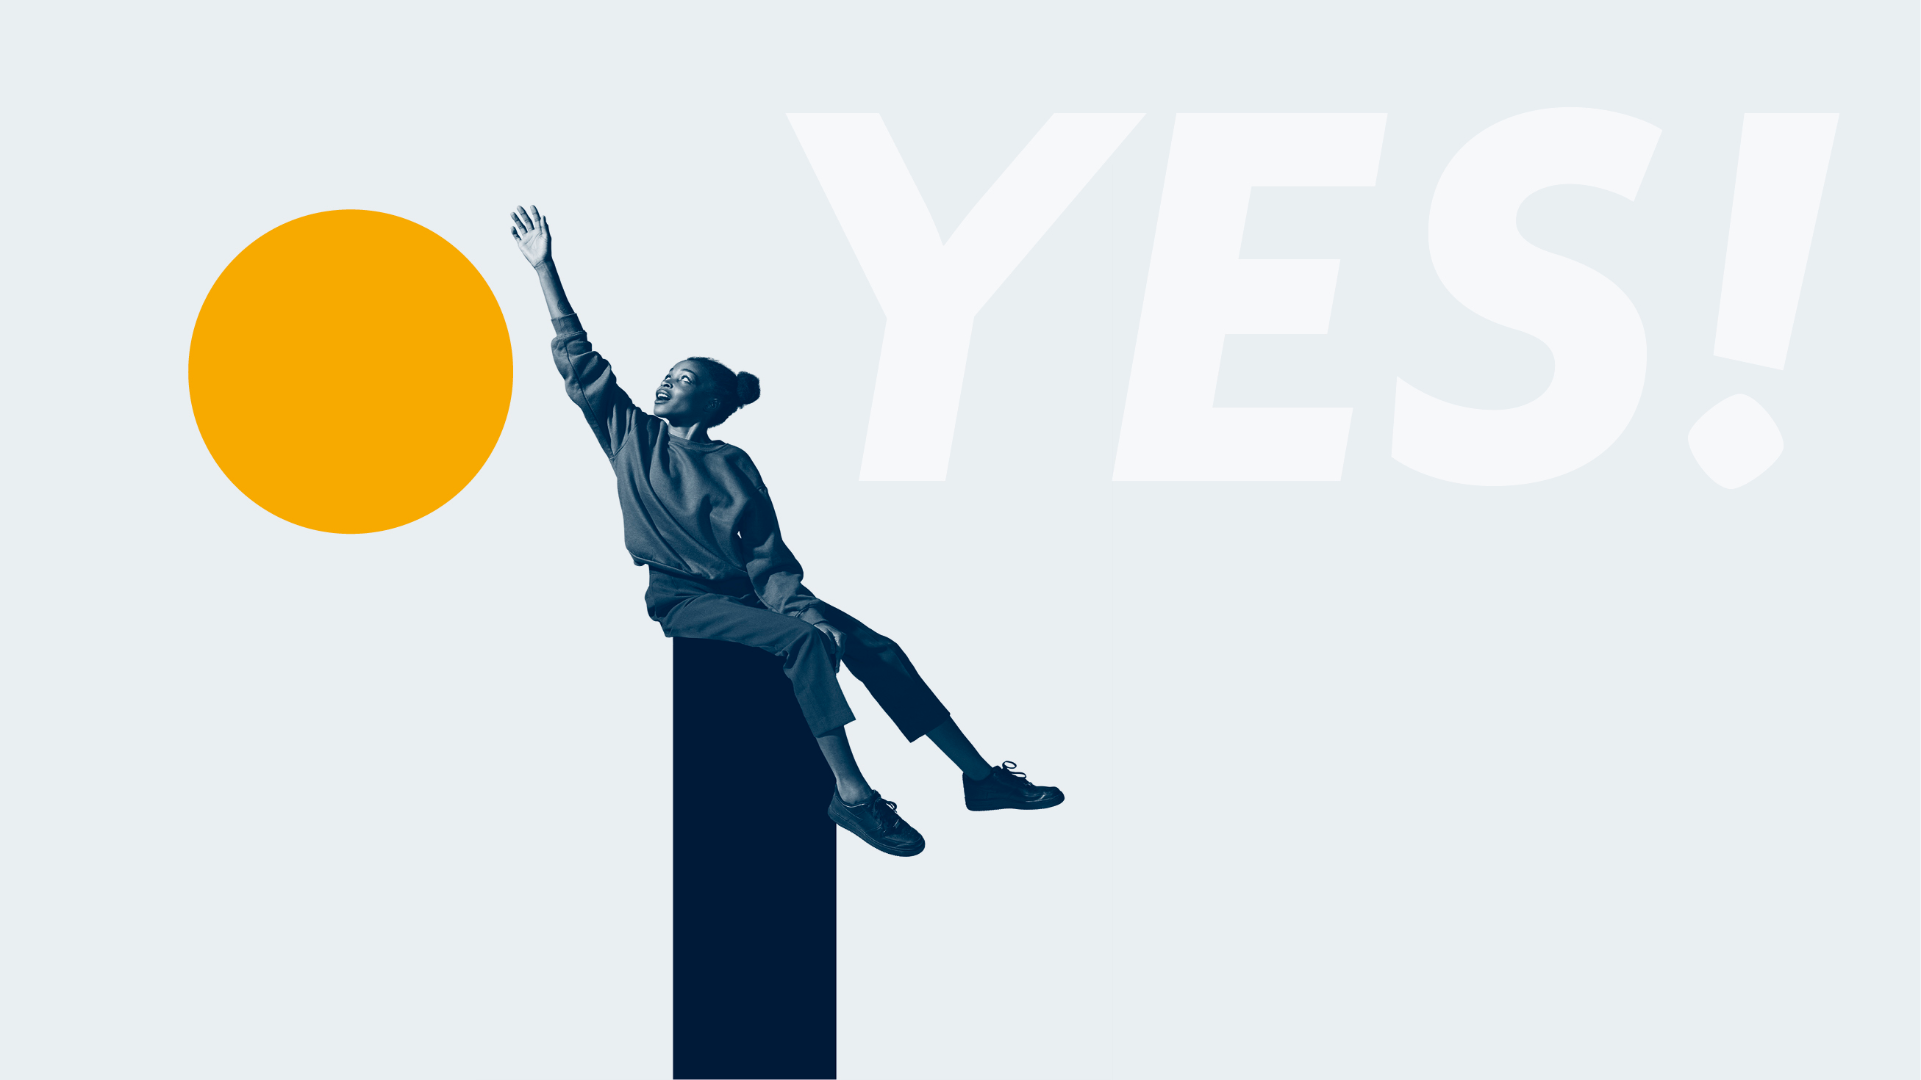 Woman sits on a beam and reaches for a ball, "Yes" is written on background